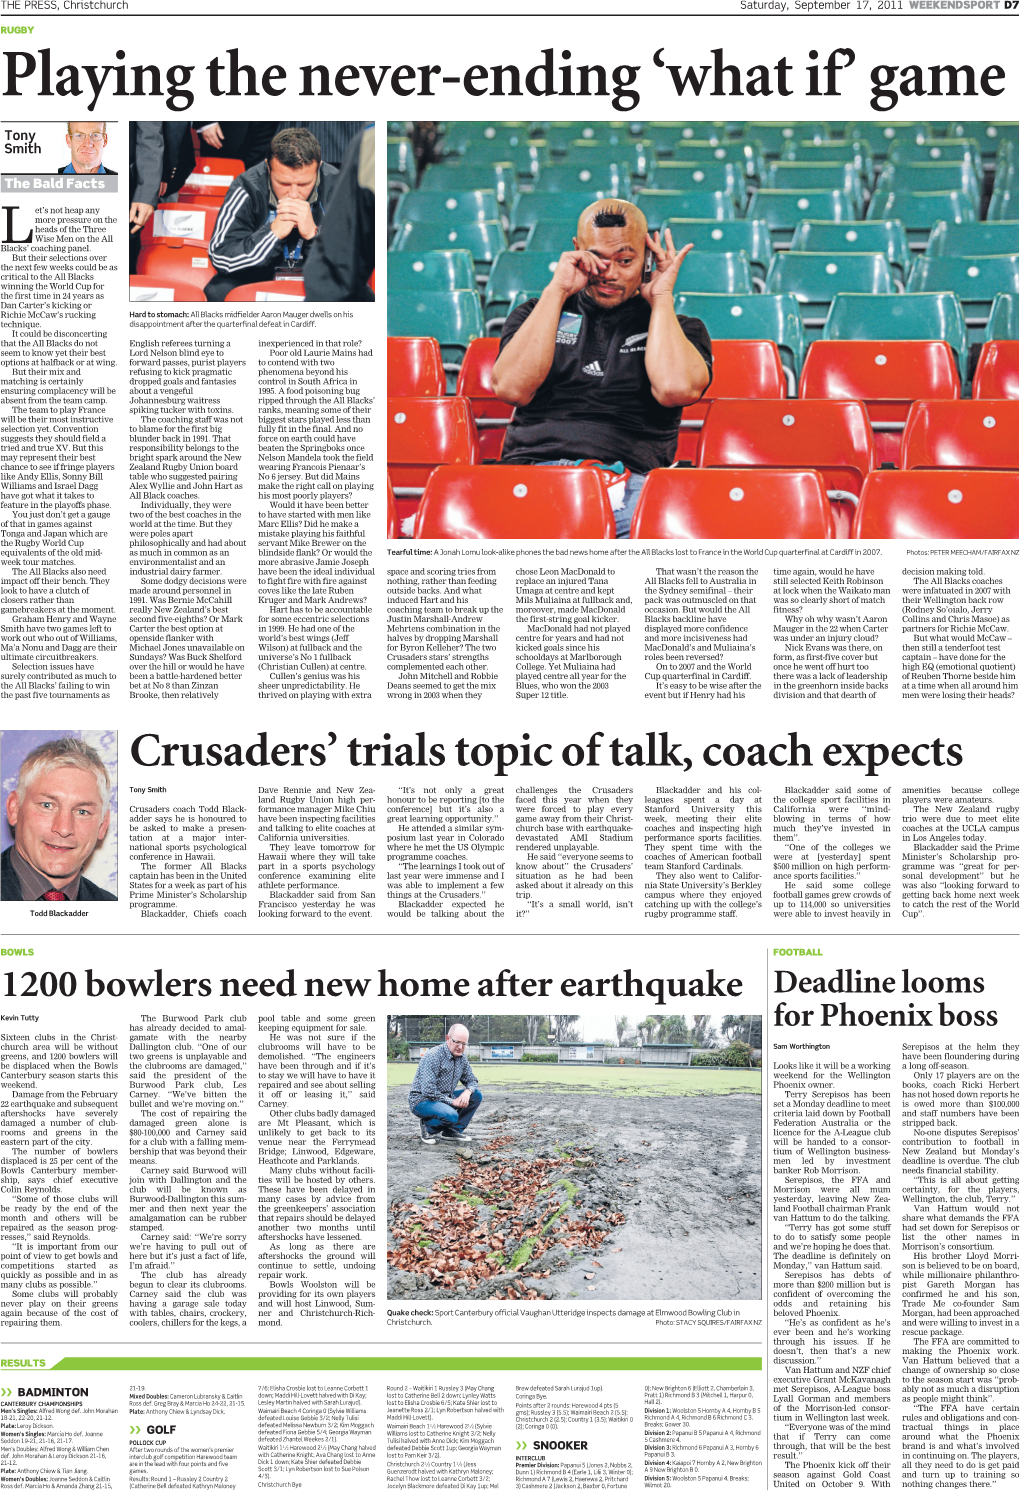 Crusaders' Trials Topic of Talk, Coach Expects